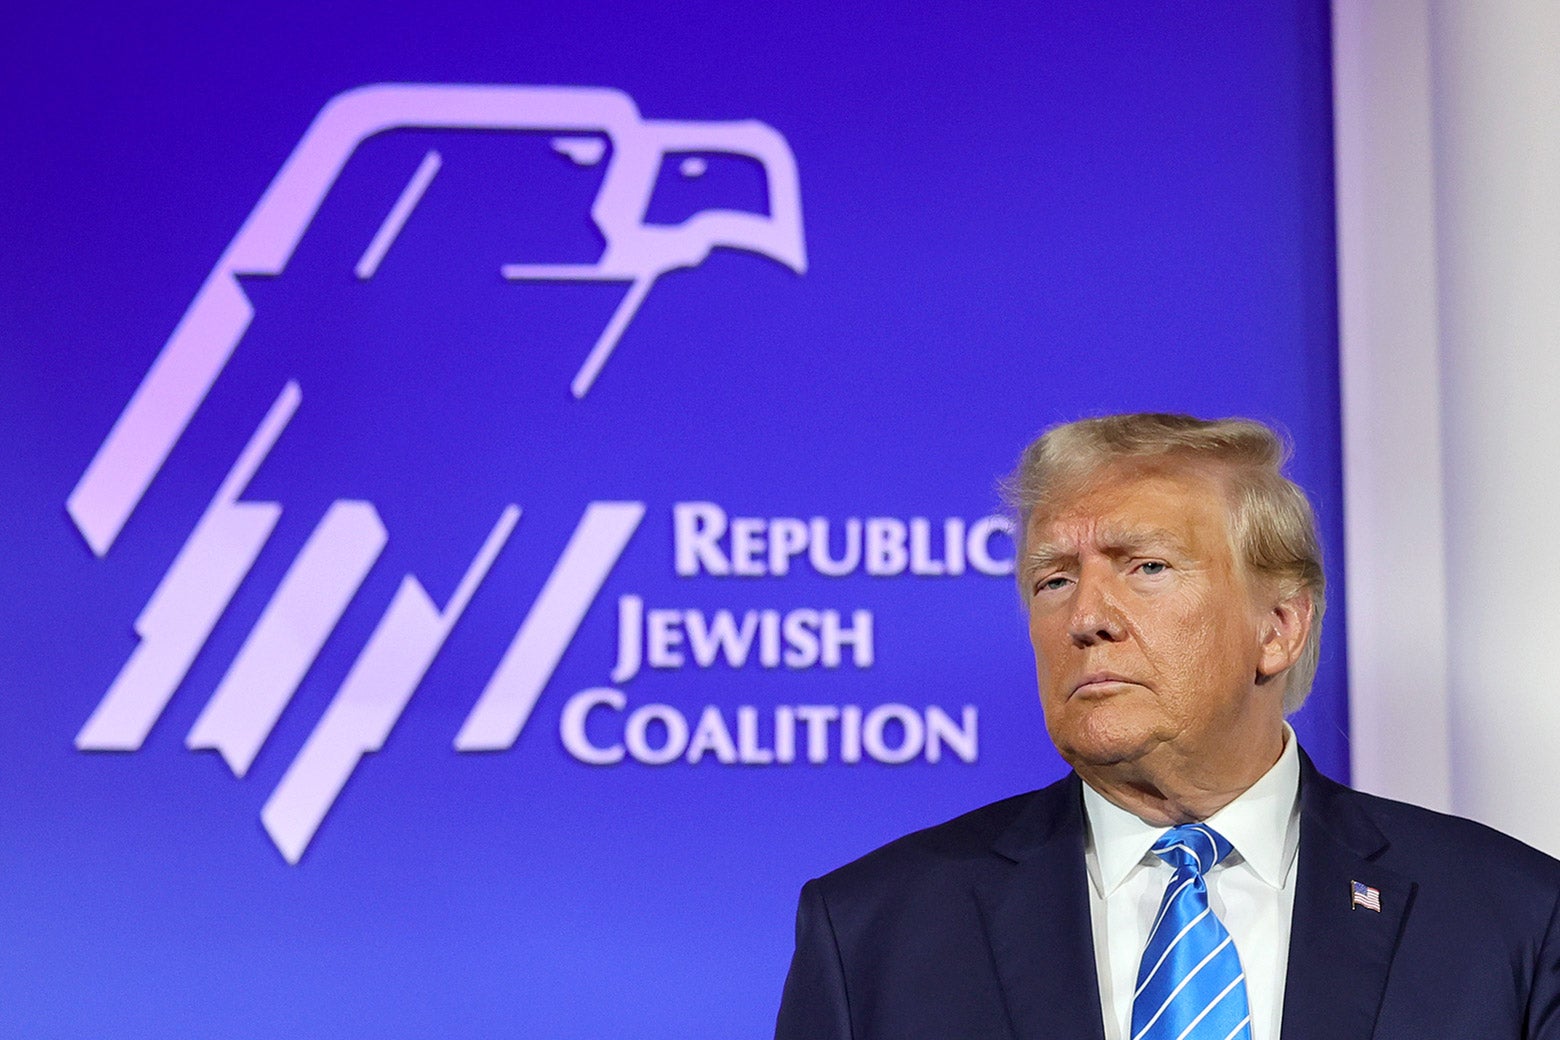 What to Really Take From Trump’s Latest Comments About Jews